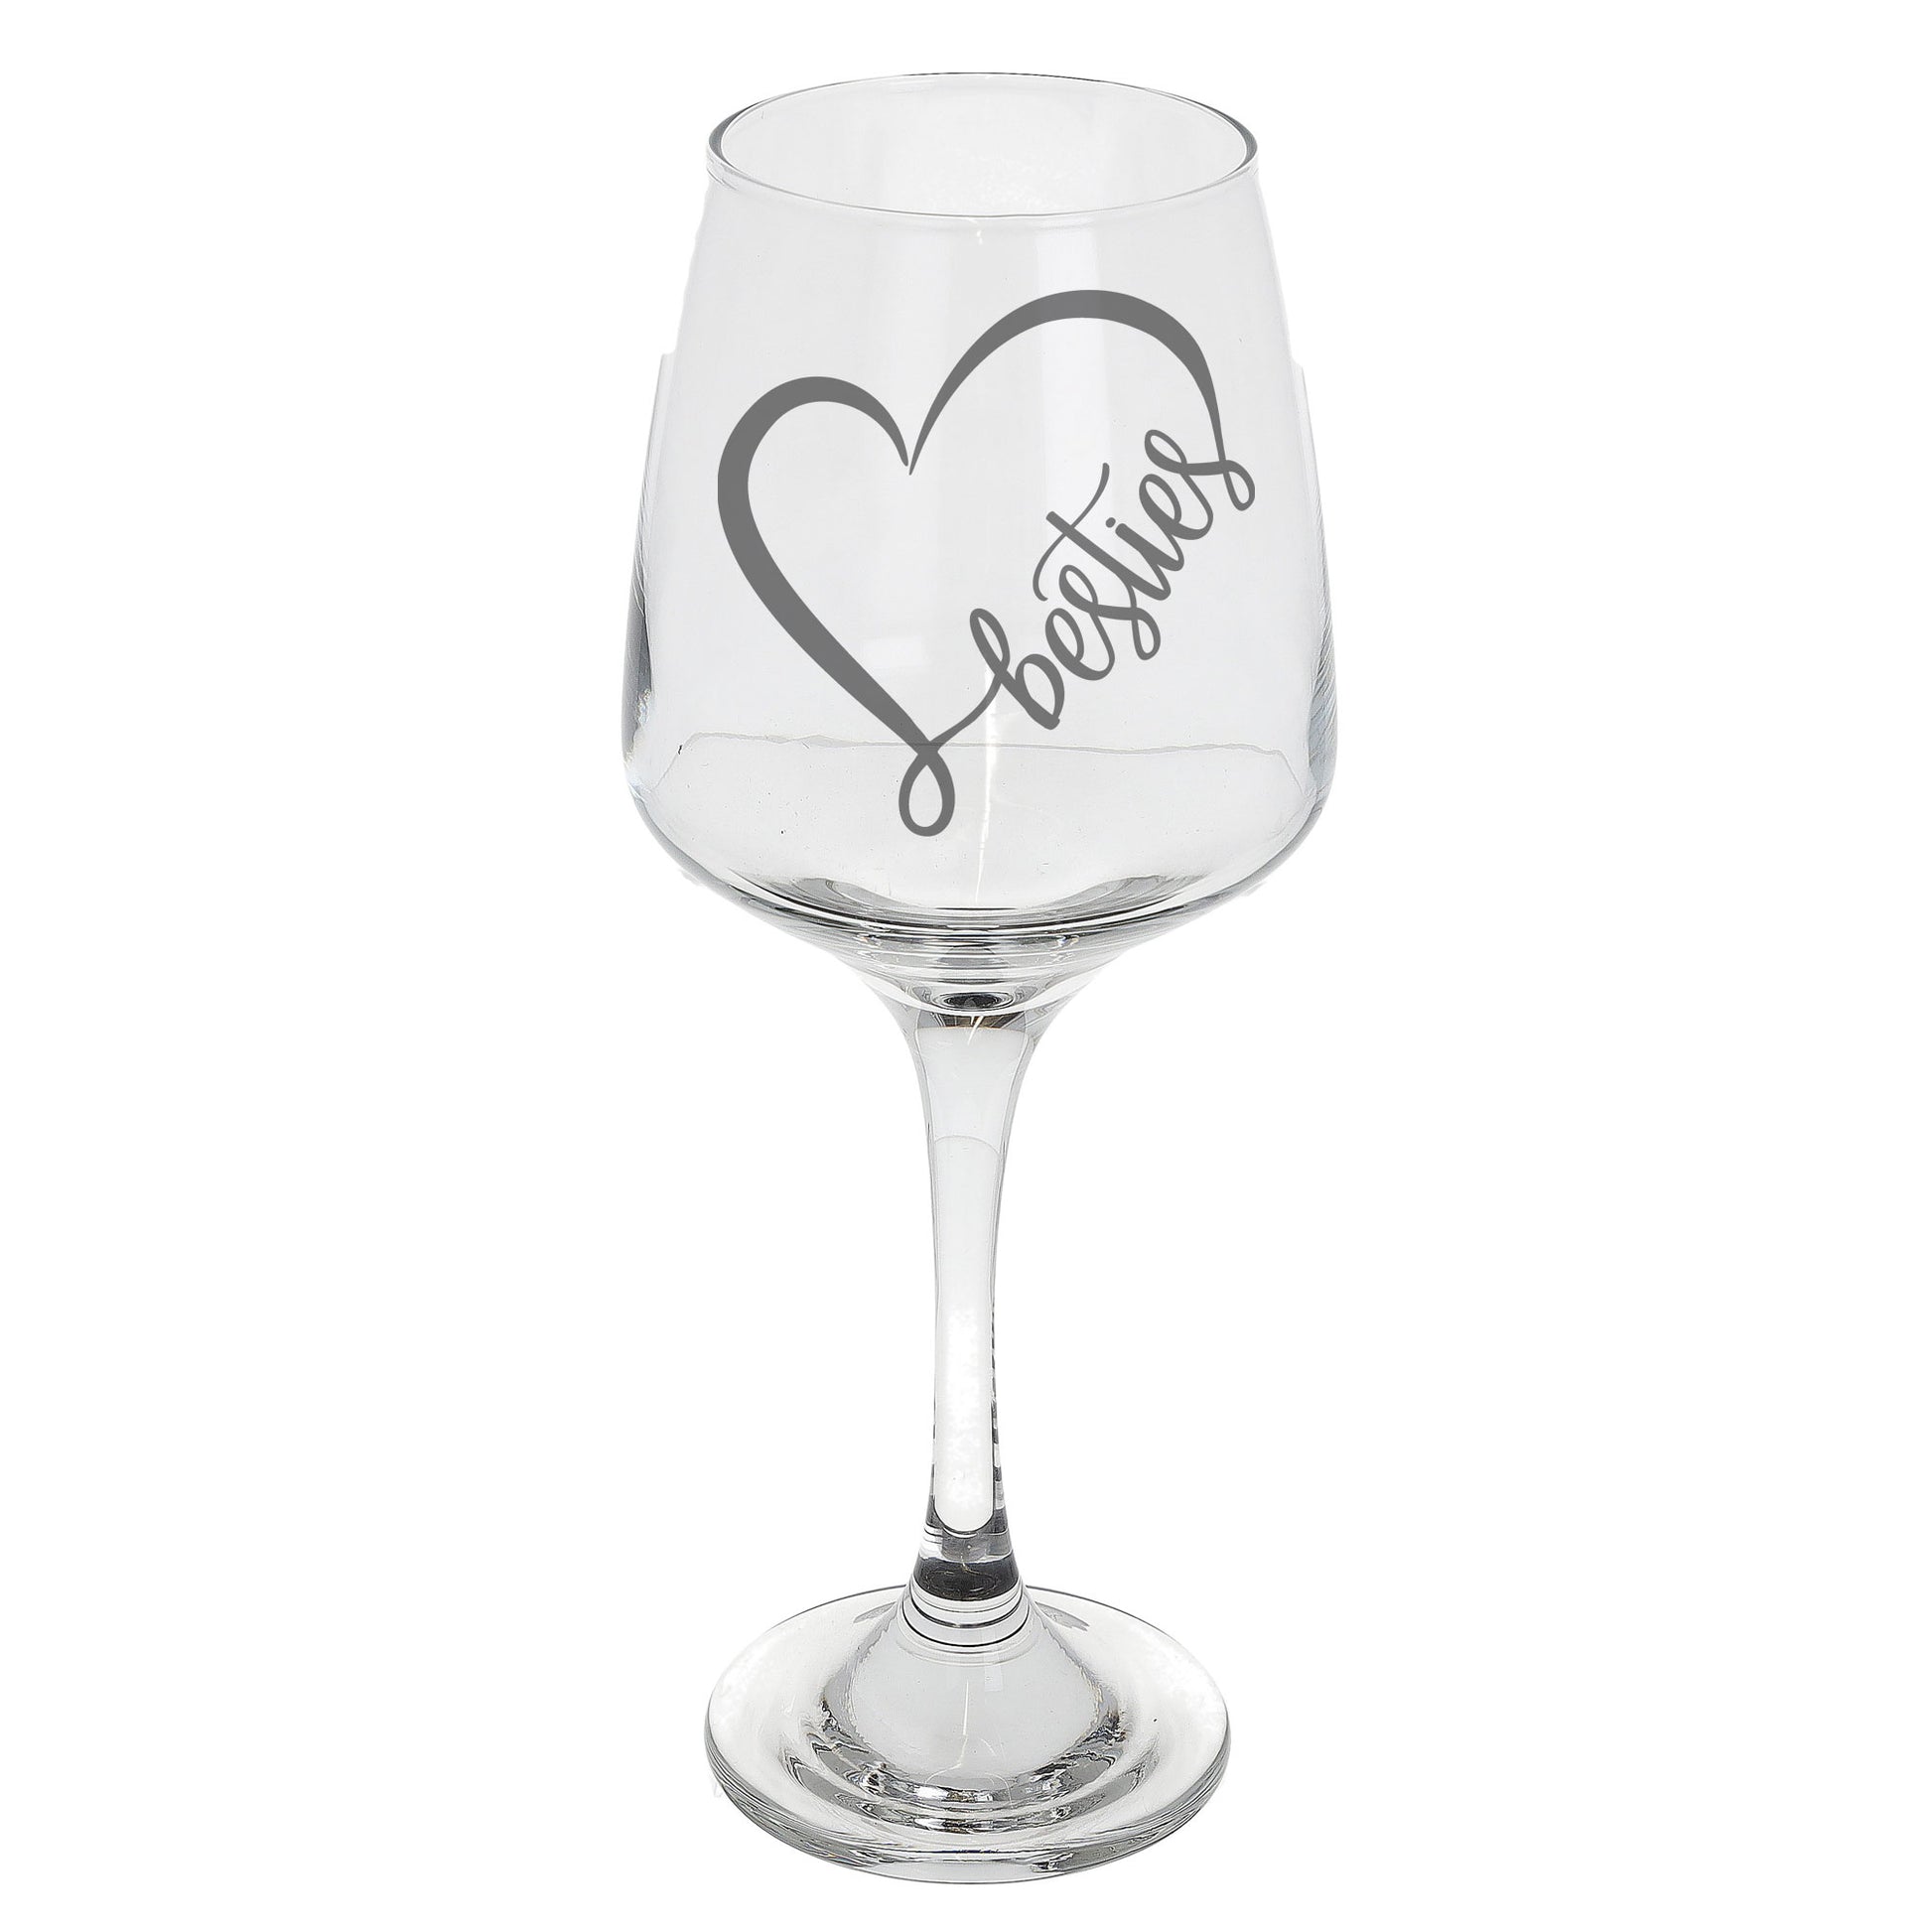 Besties Engraved Wine Glass and/or Coaster Set  - Always Looking Good - Wine Glass Only  